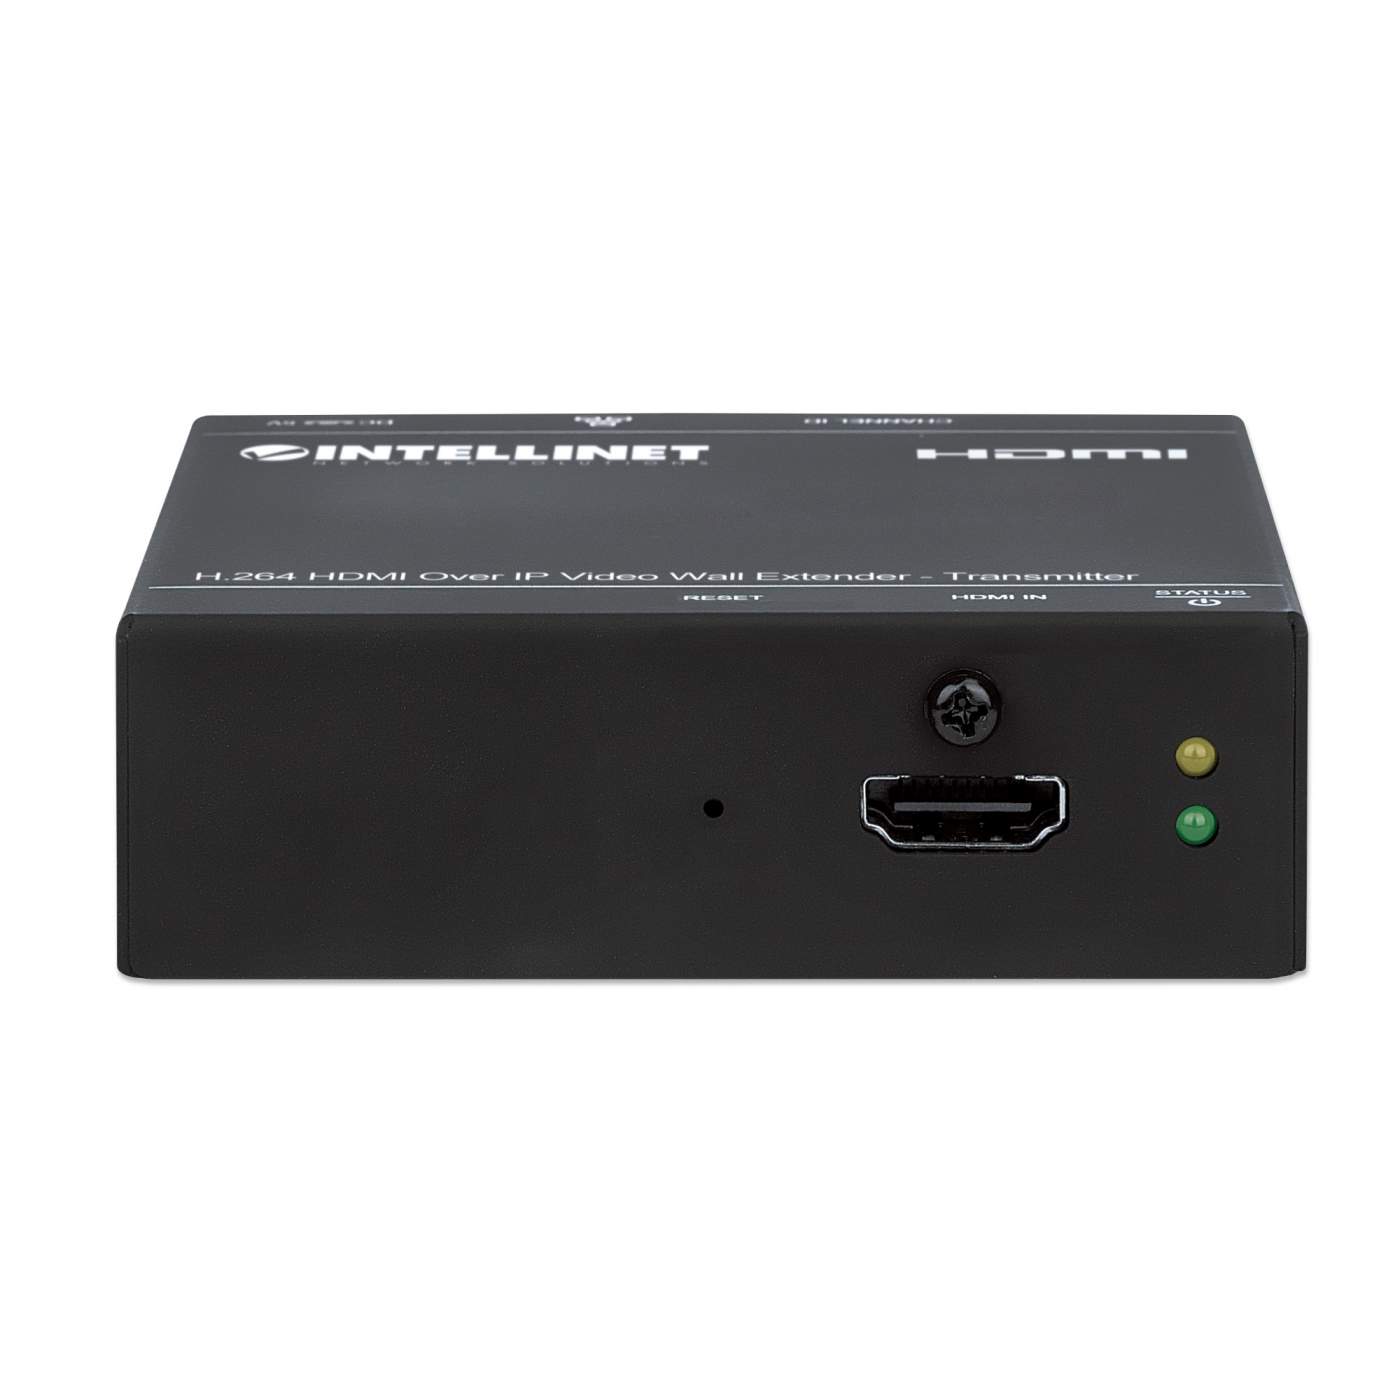 H.264 HDMI Over IP Video Wall Extender - Transmitter Image 5